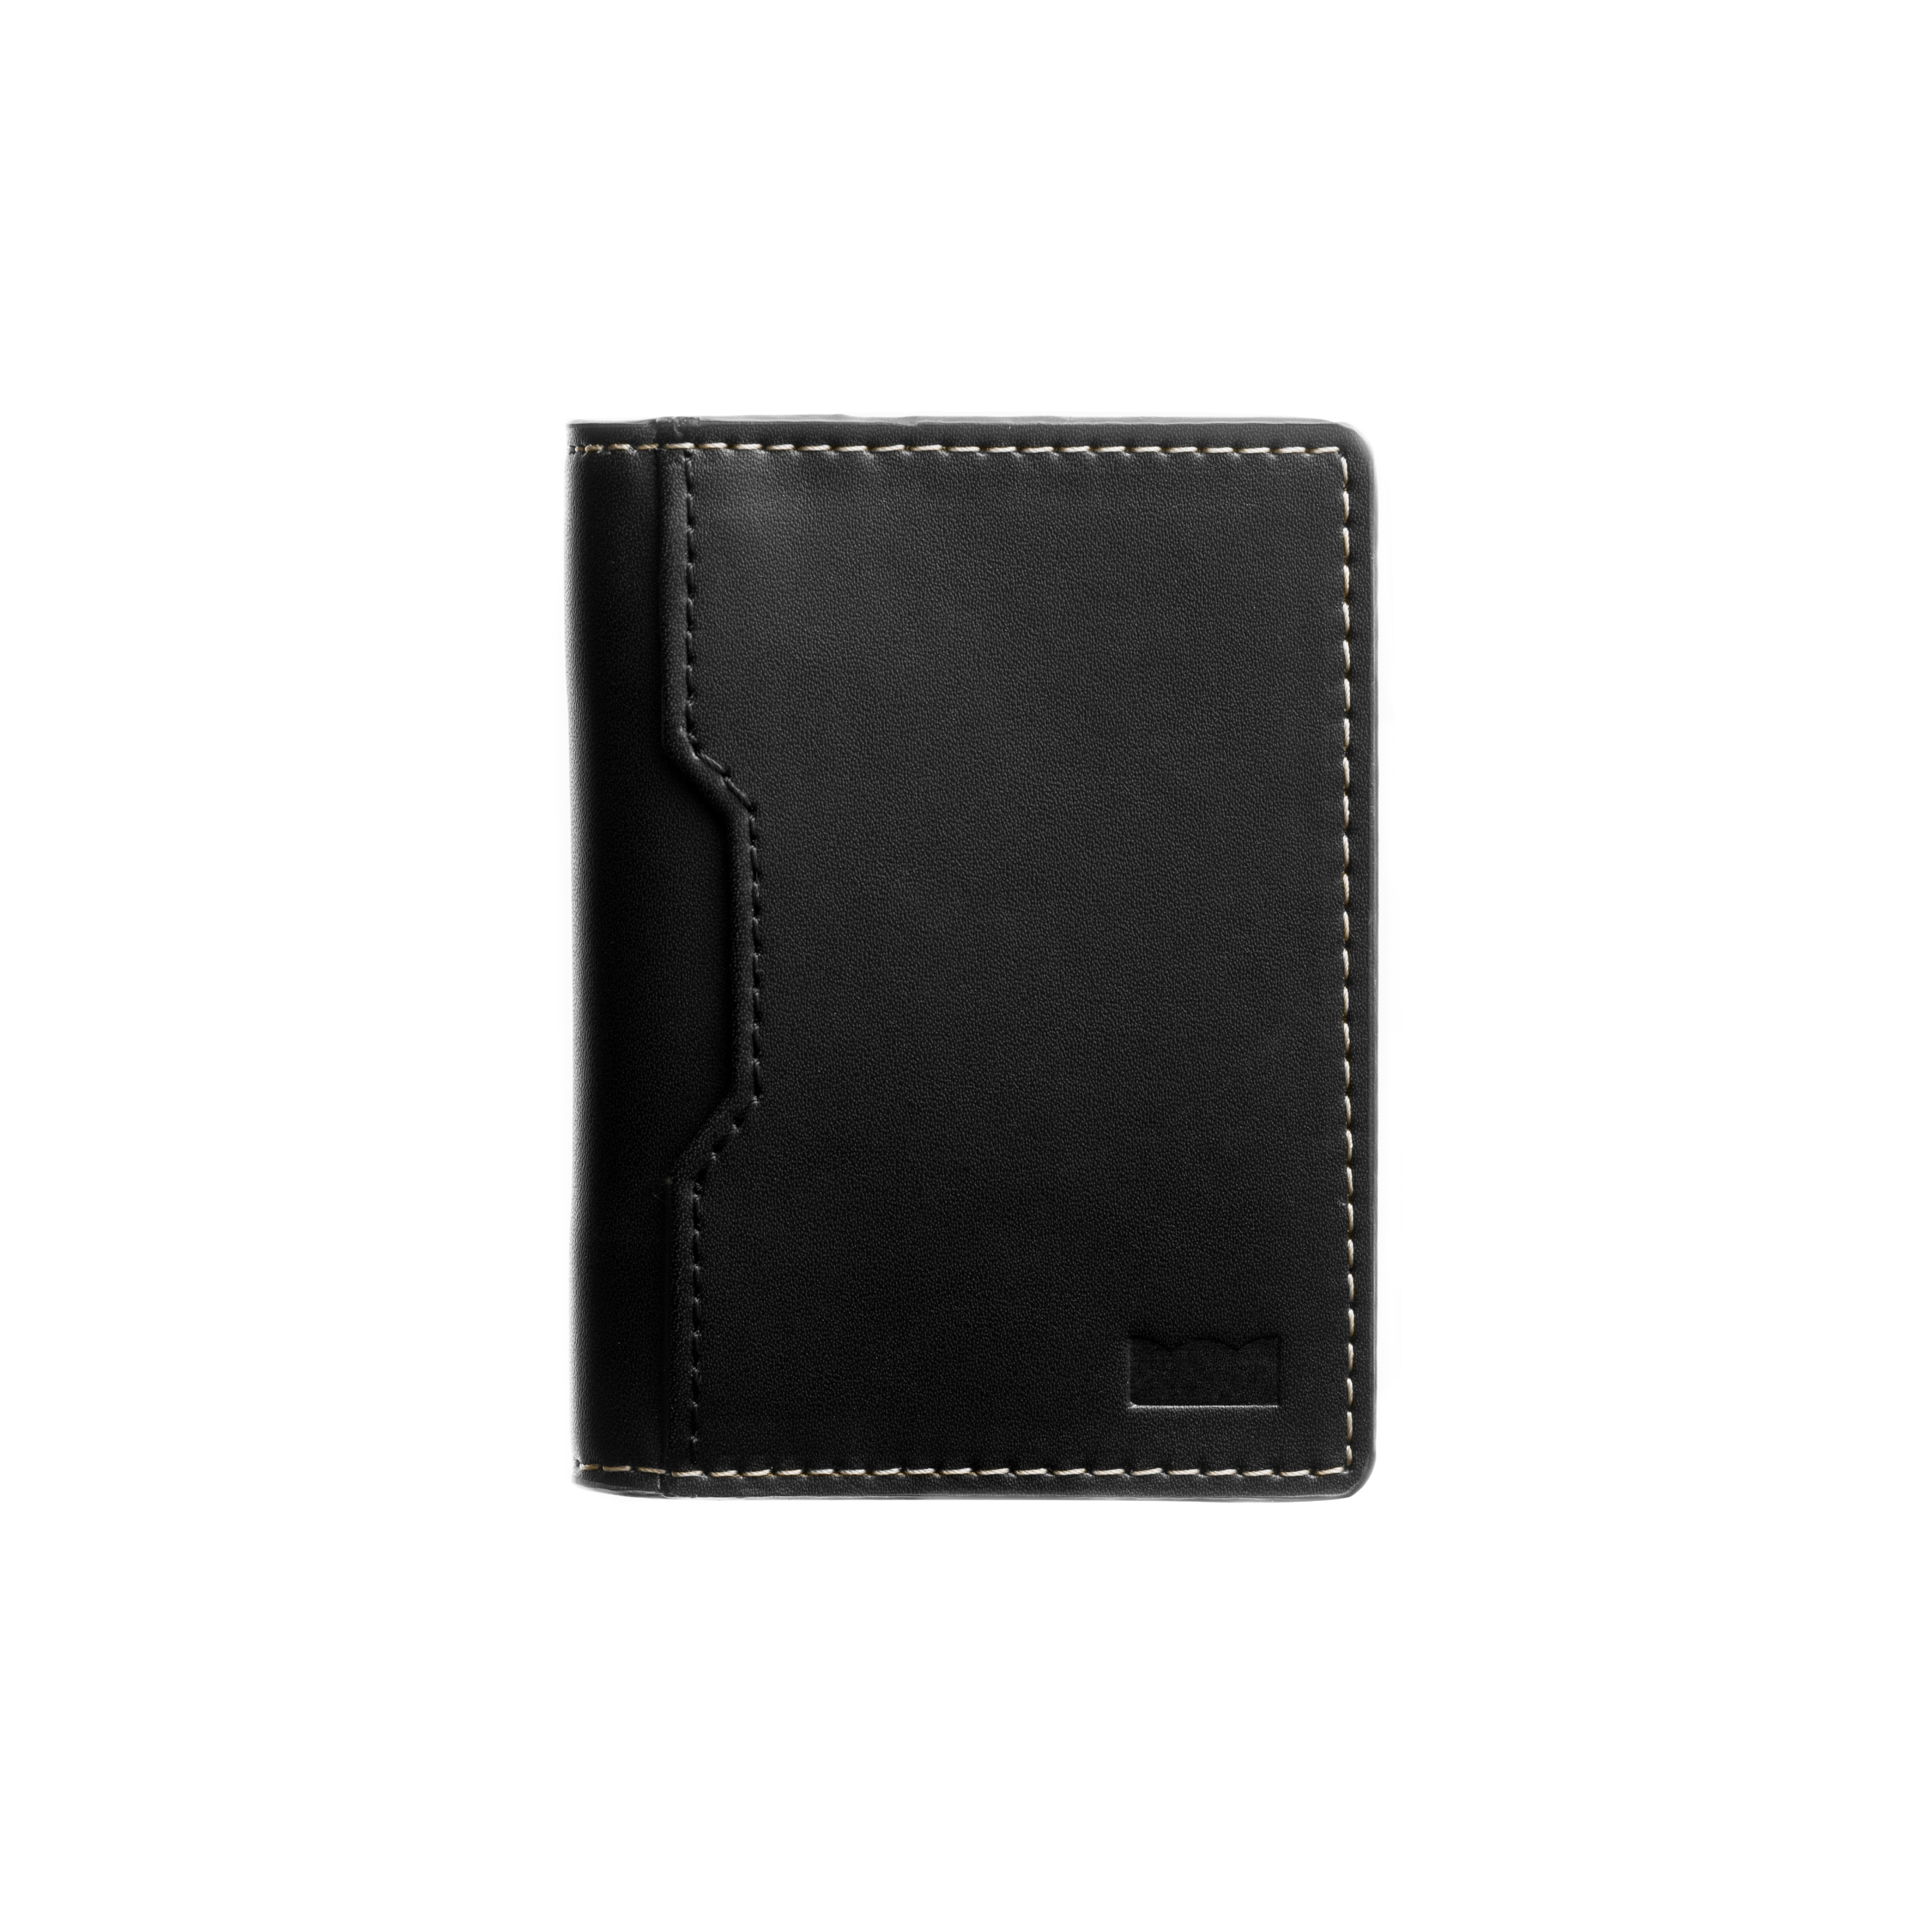 Charcoal Black & Sand Compact Wallet